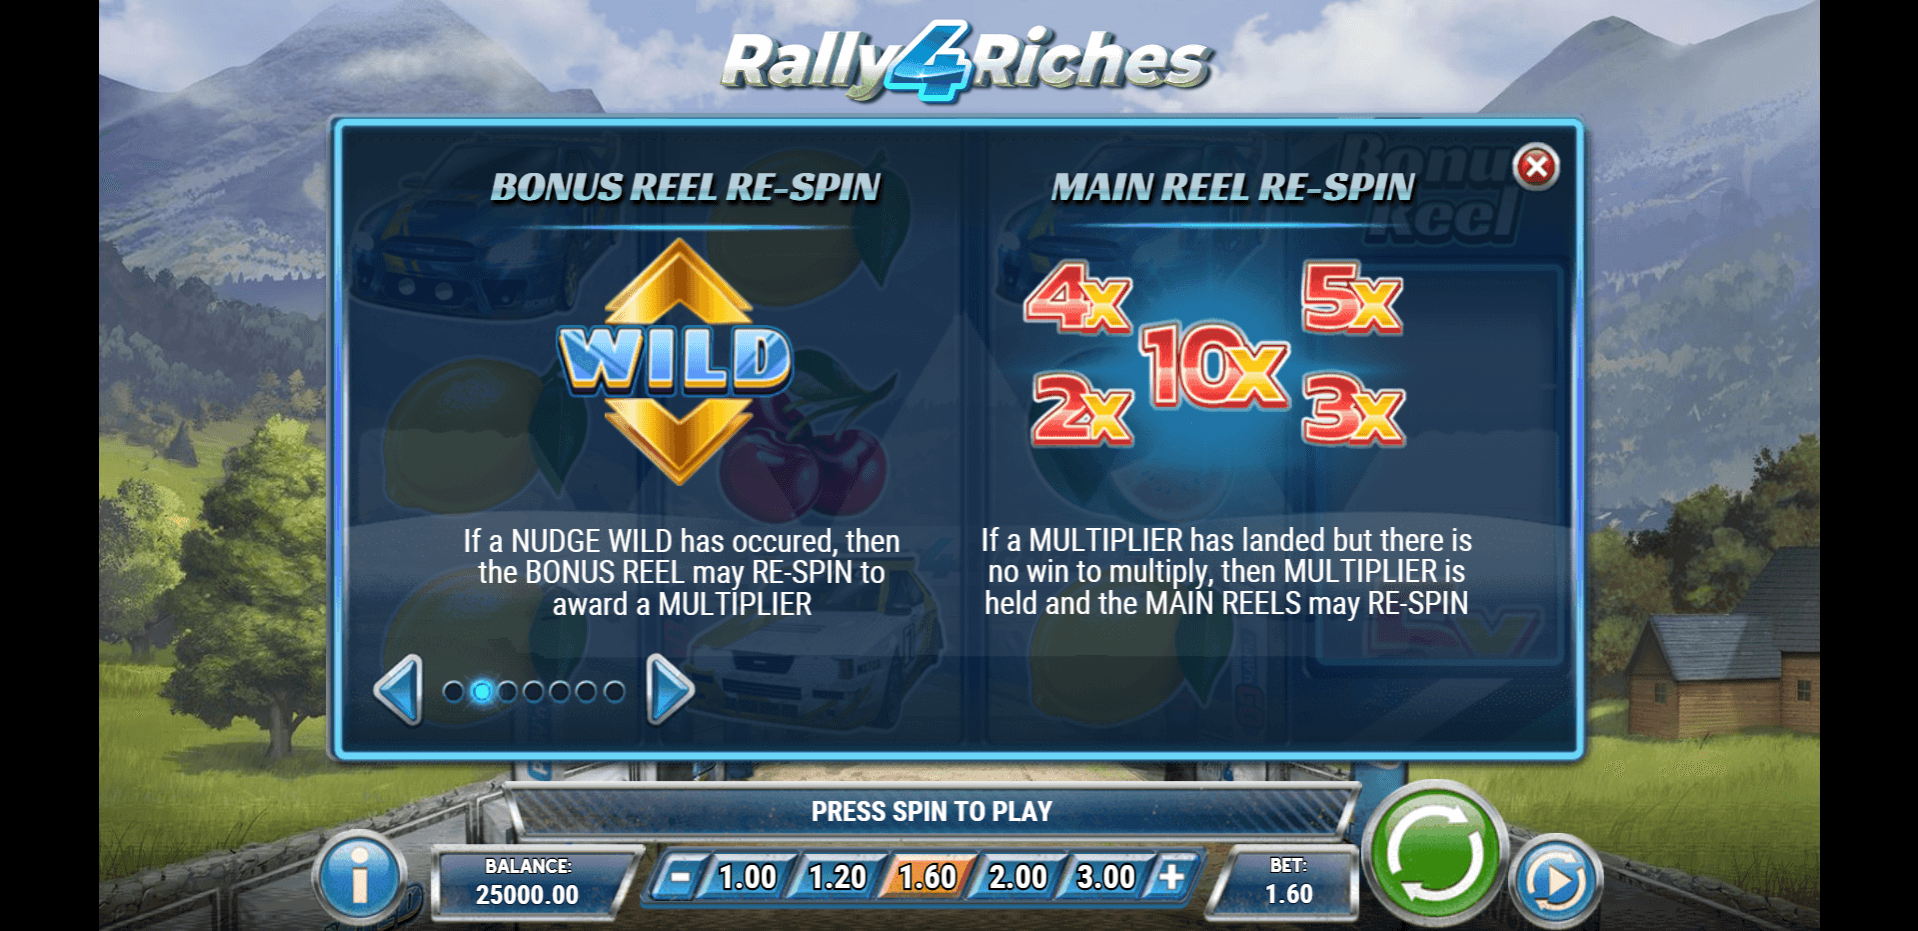 rally 4 riches slot machine detail image 1